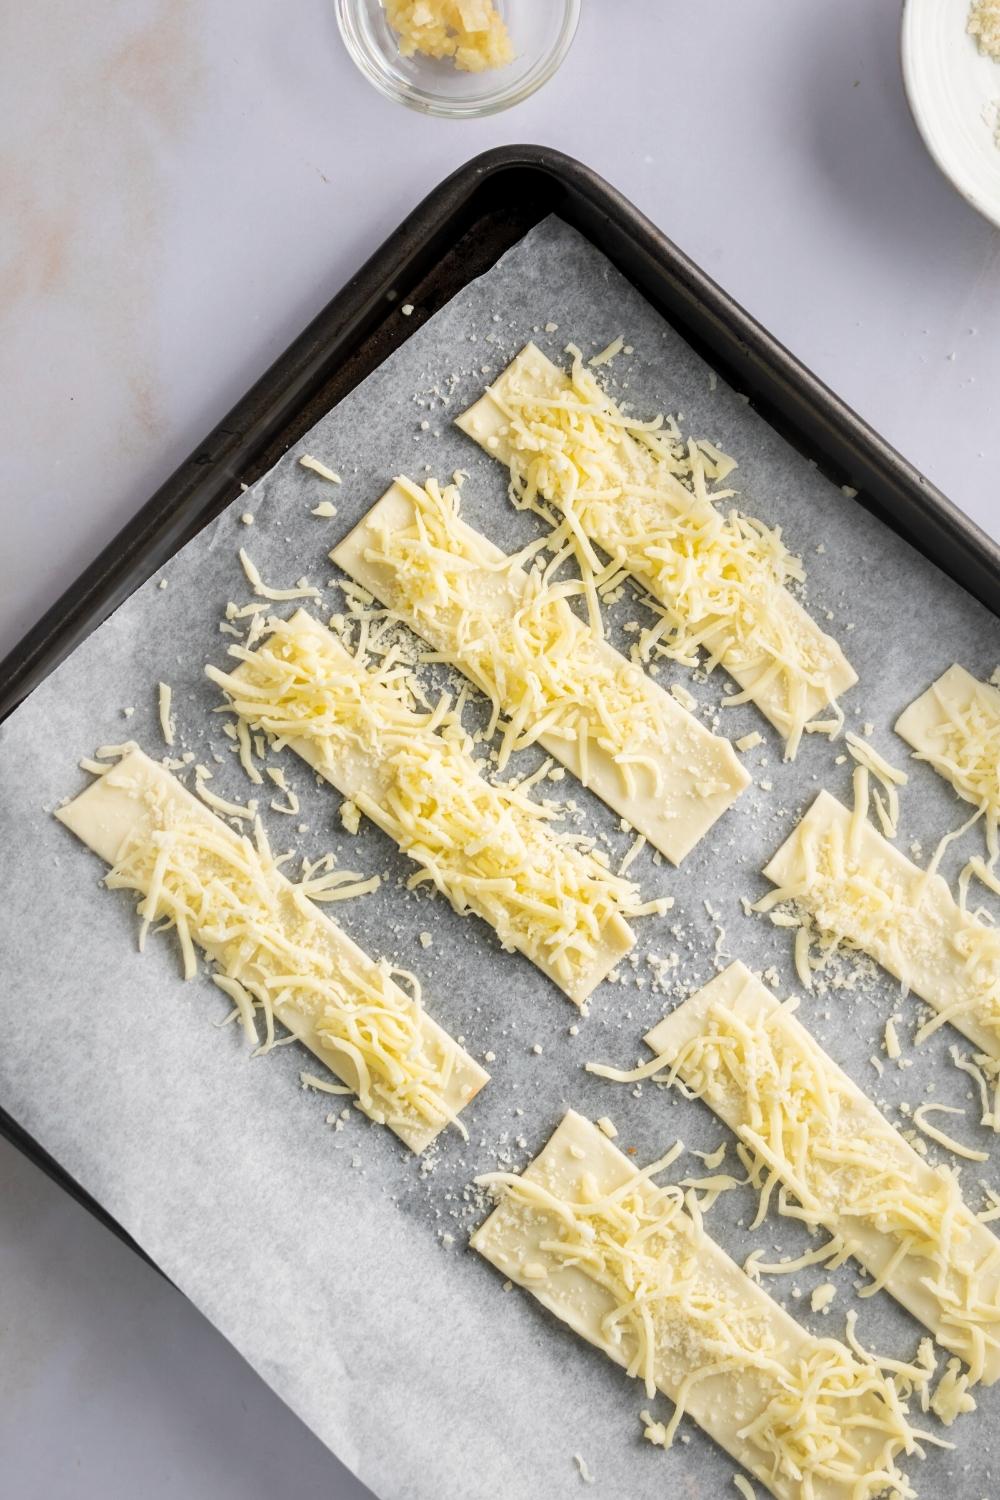 Shredded cheese on top of four dough sticks on a piece of parchment paper on a baking tray.